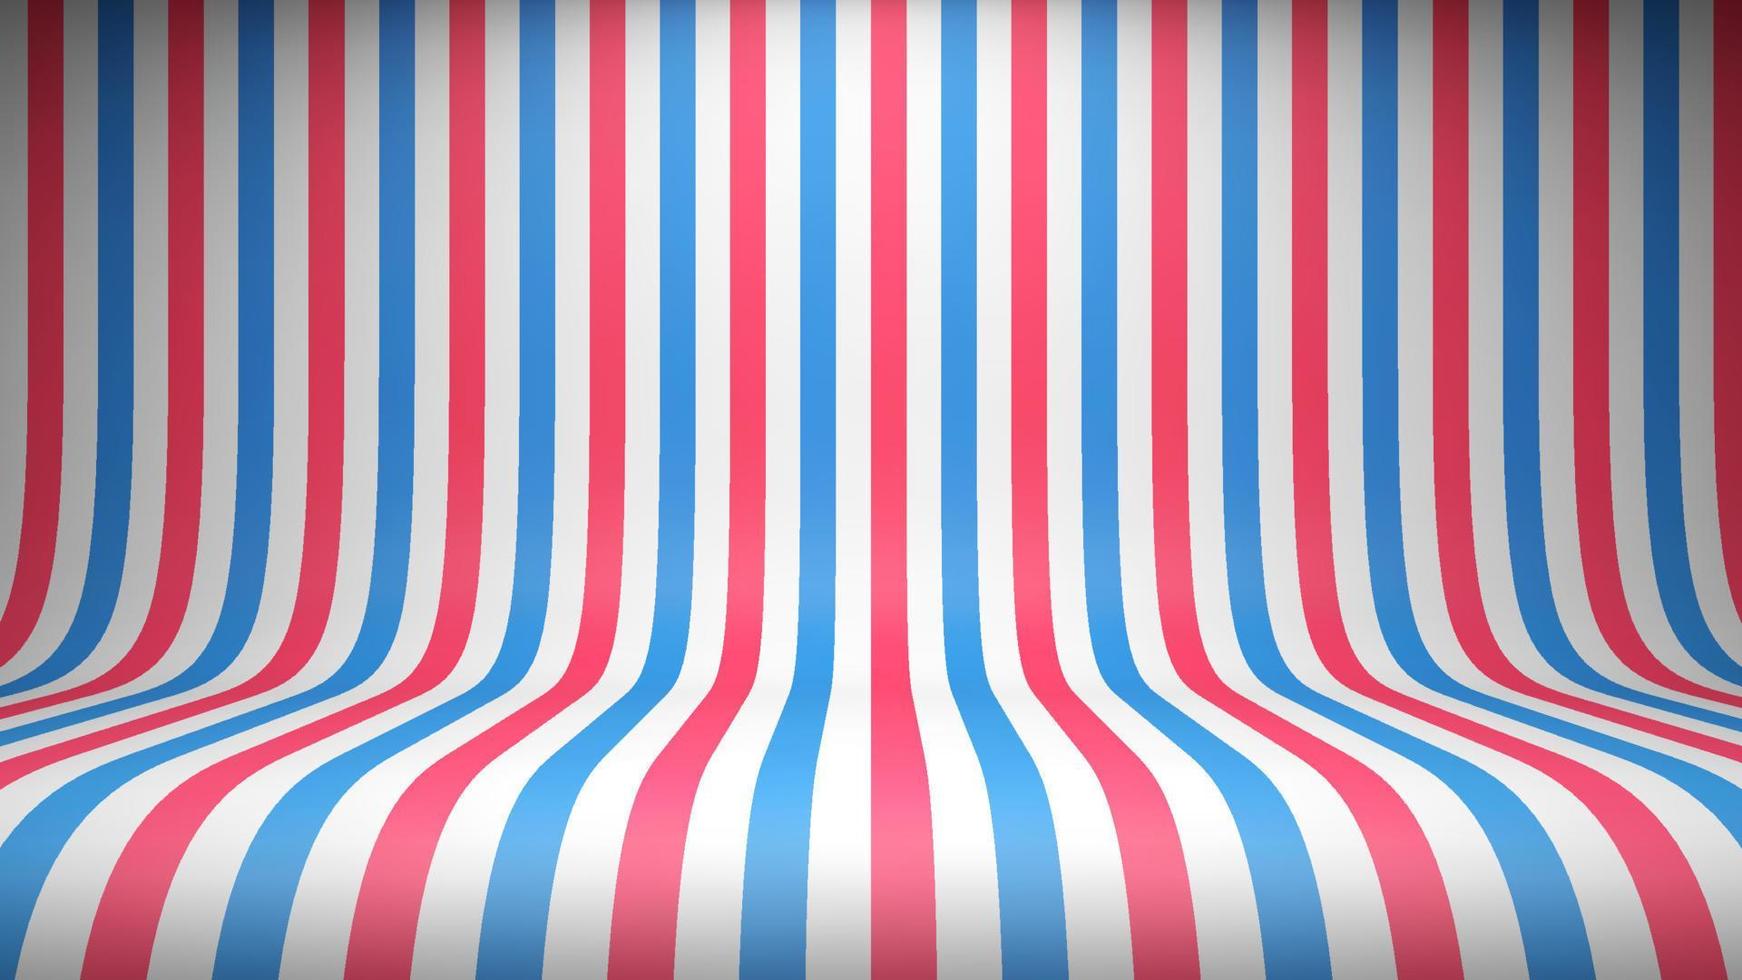 Studio backdrop with red, white and blue stripes vector